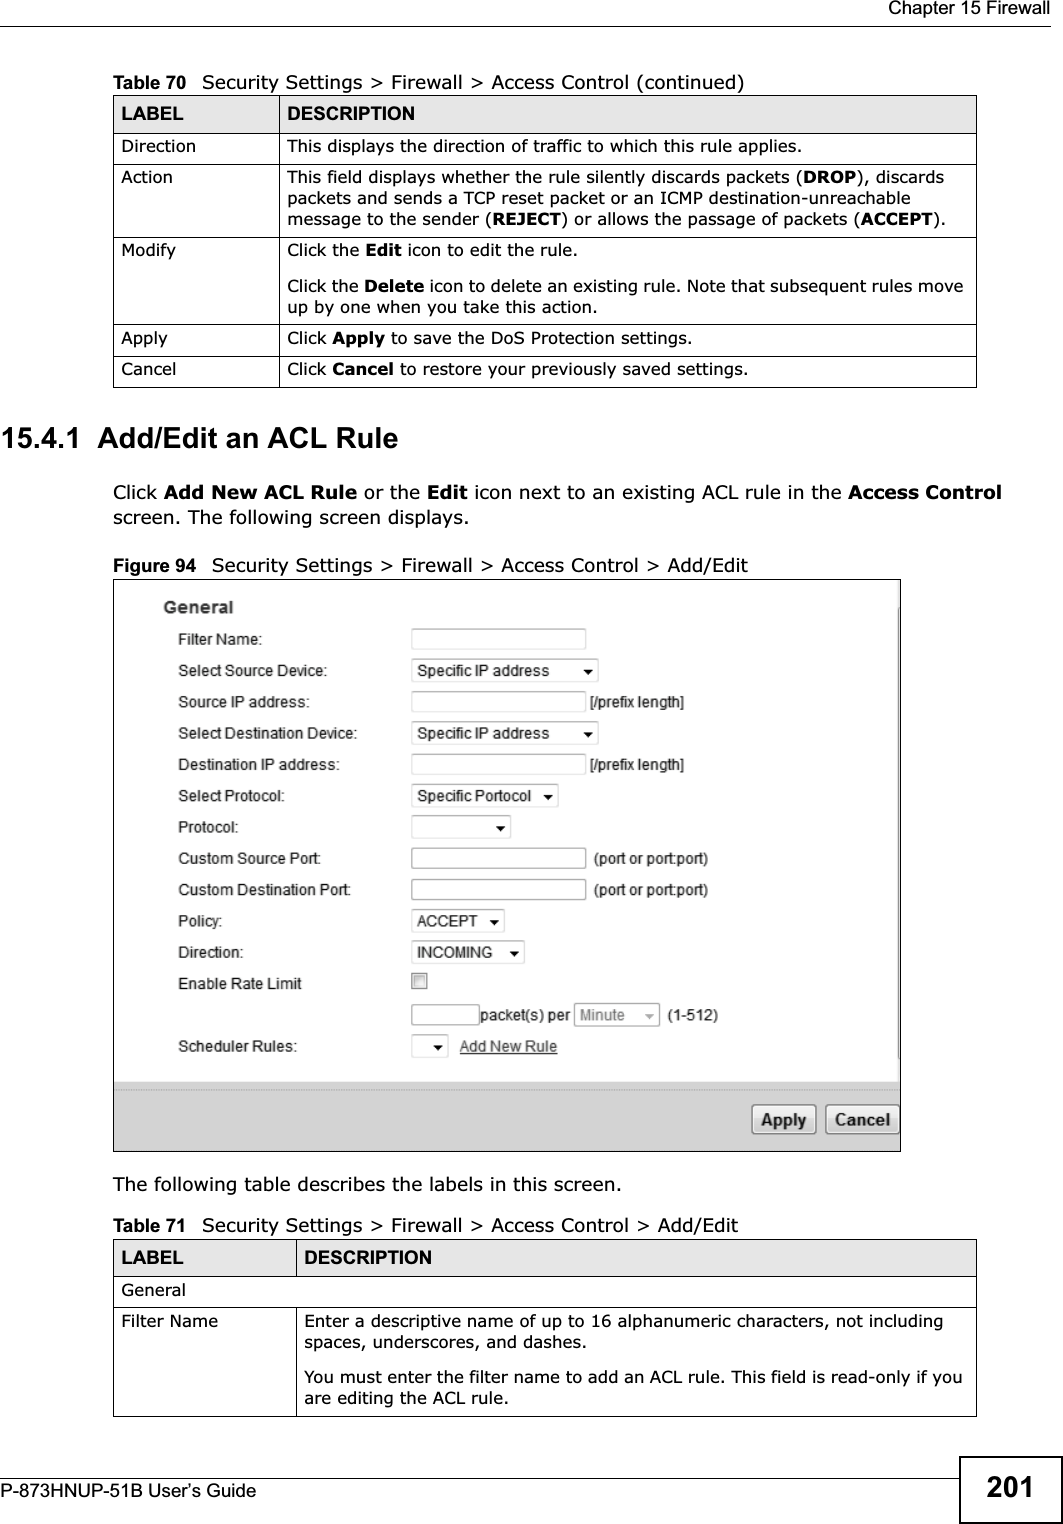  Chapter 15 FirewallP-873HNUP-51B User’s Guide 20115.4.1  Add/Edit an ACL RuleClick Add New ACL Rule or the Edit icon next to an existing ACL rule in the Access Control screen. The following screen displays.Figure 94   Security Settings &gt; Firewall &gt; Access Control &gt; Add/EditThe following table describes the labels in this screen.Direction  This displays the direction of traffic to which this rule applies.Action This field displays whether the rule silently discards packets (DROP), discards packets and sends a TCP reset packet or an ICMP destination-unreachable message to the sender (REJECT) or allows the passage of packets (ACCEPT).Modify Click the Edit icon to edit the rule.Click the Delete icon to delete an existing rule. Note that subsequent rules move up by one when you take this action.Apply Click Apply to save the DoS Protection settings.Cancel Click Cancel to restore your previously saved settings.Table 70   Security Settings &gt; Firewall &gt; Access Control (continued)LABEL DESCRIPTIONTable 71   Security Settings &gt; Firewall &gt; Access Control &gt; Add/EditLABEL DESCRIPTIONGeneralFilter Name Enter a descriptive name of up to 16 alphanumeric characters, not including spaces, underscores, and dashes. You must enter the filter name to add an ACL rule. This field is read-only if you are editing the ACL rule.